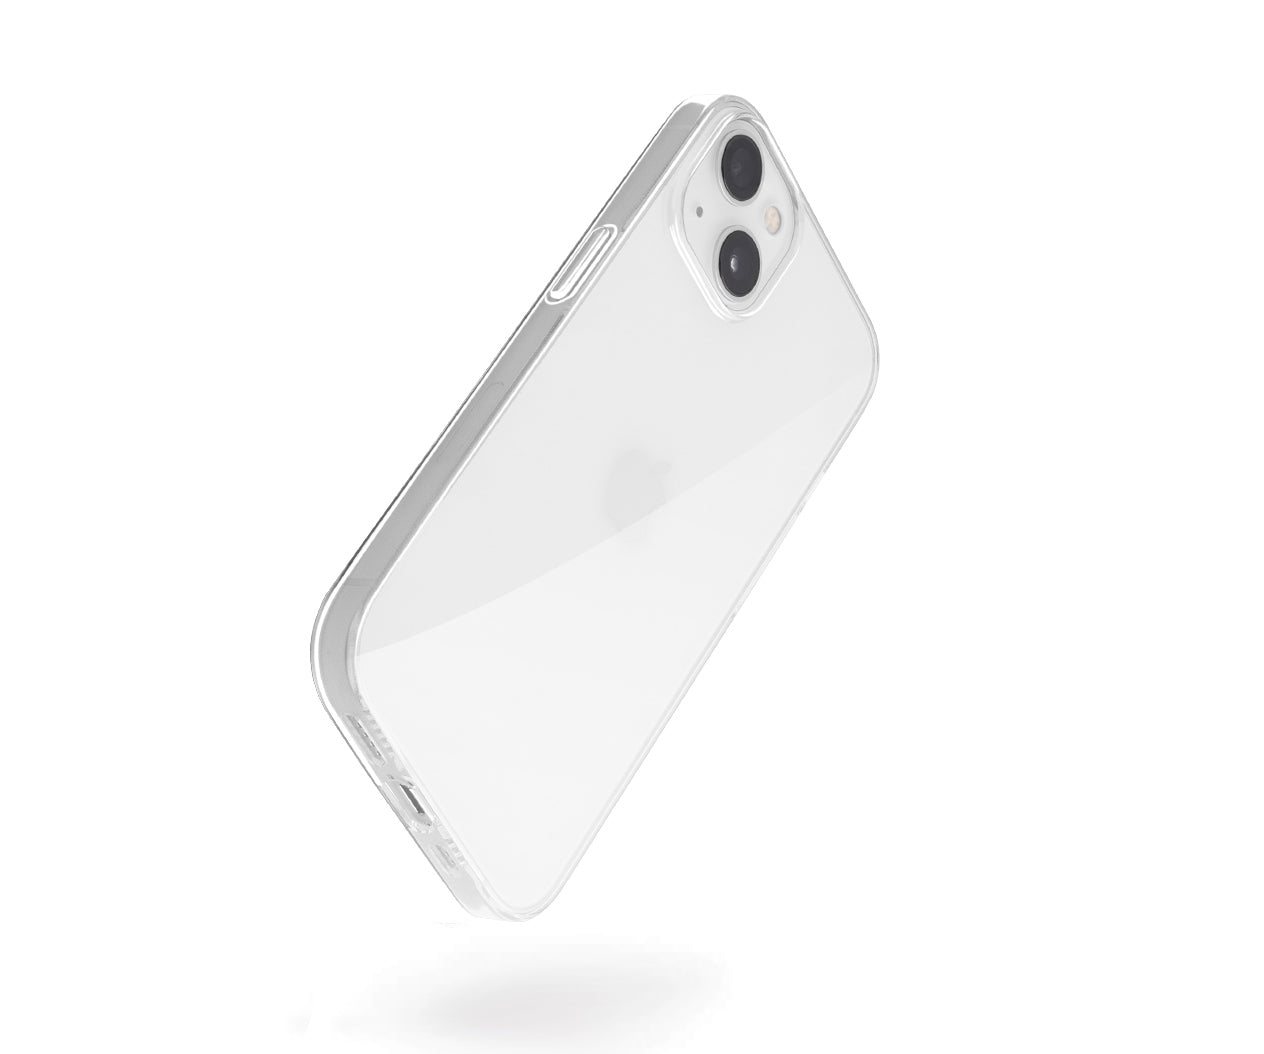 totallee Thin iPhone 13 Mini Case, Thinnest Cover Ultra Slim Minimal - for Apple iPhone 13 Mini (2021) (Frosted Clear)